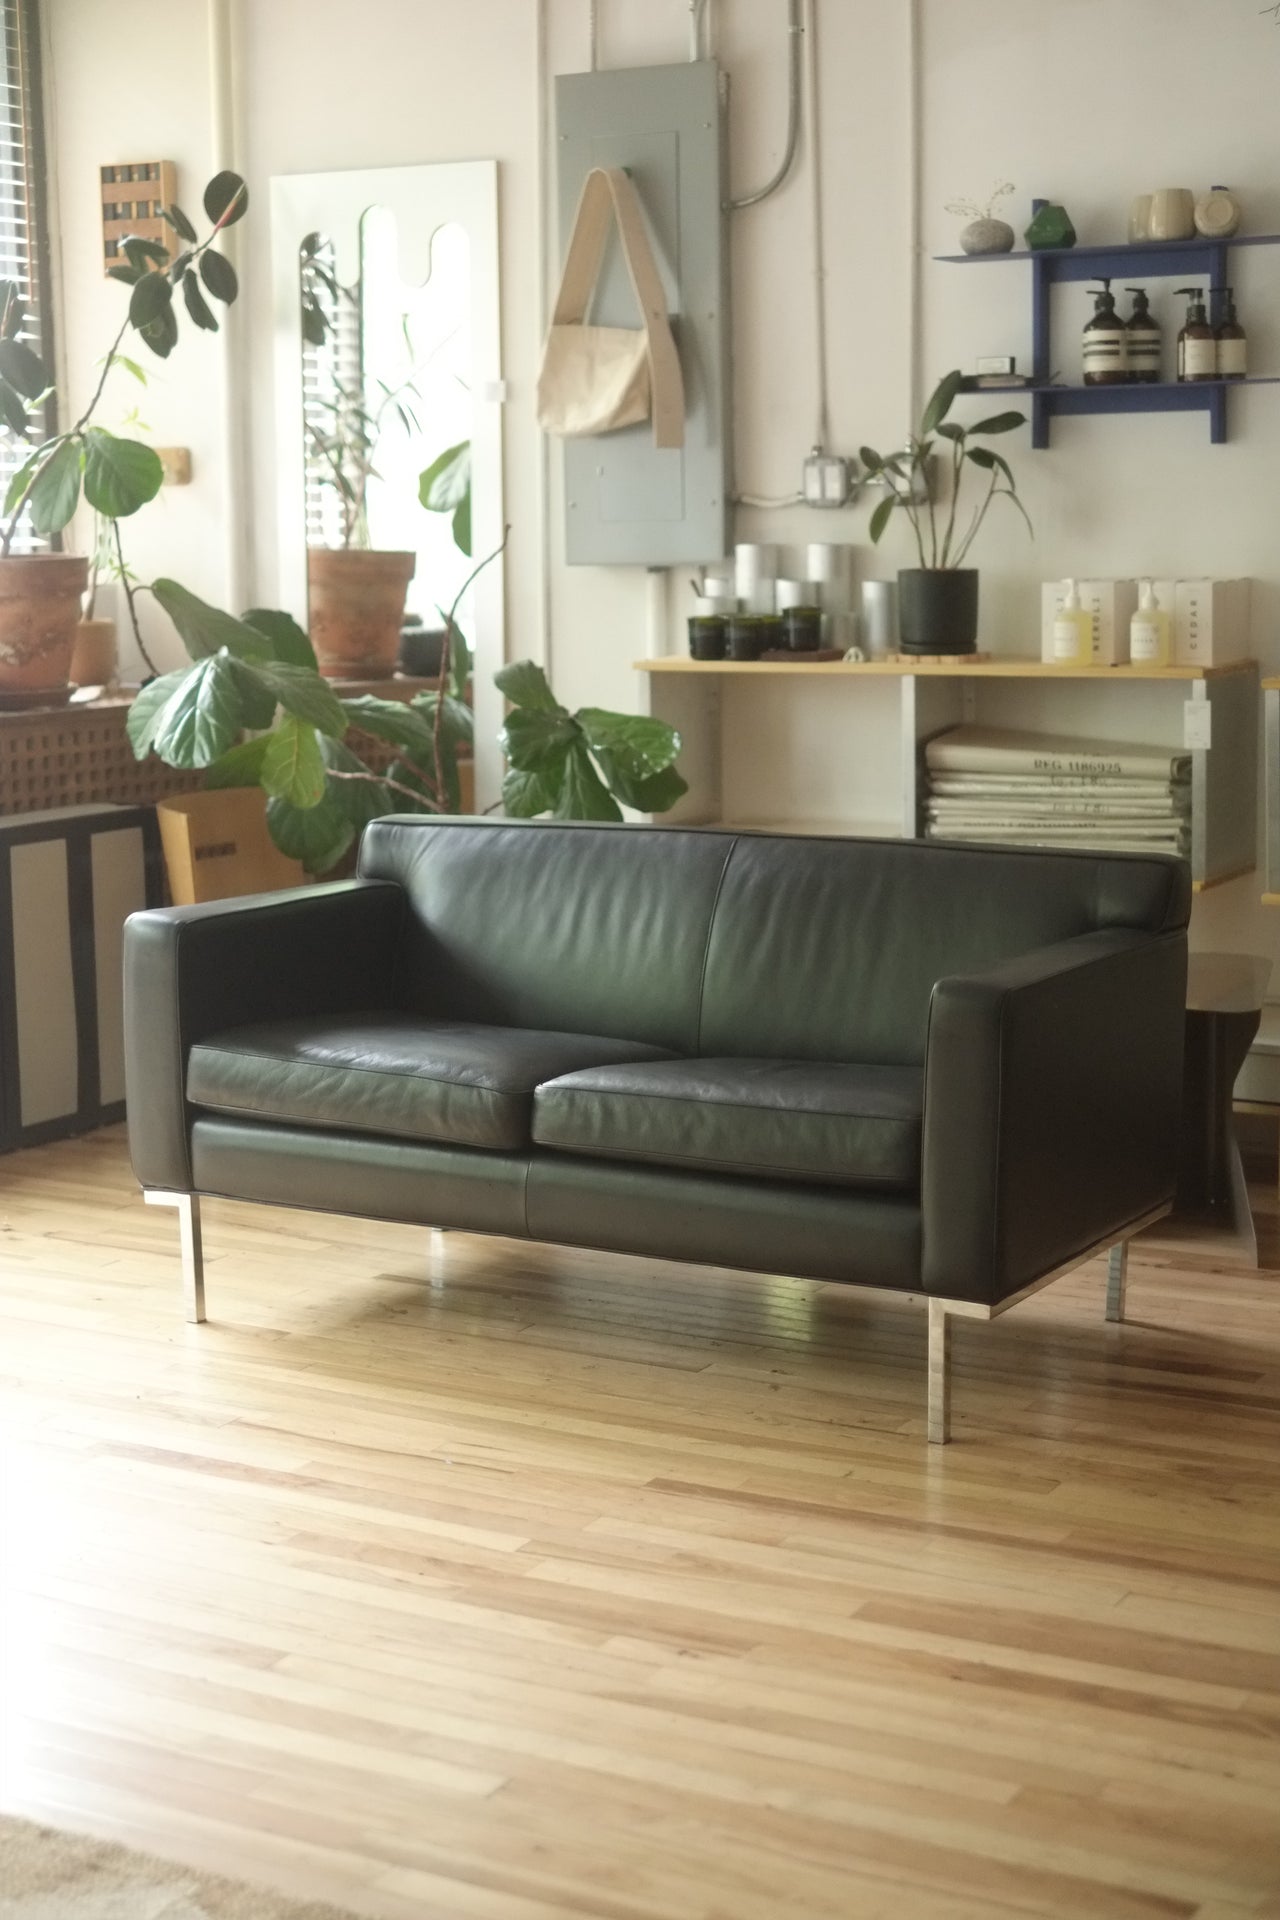 Theatre Sofa in Black Leather by DWR